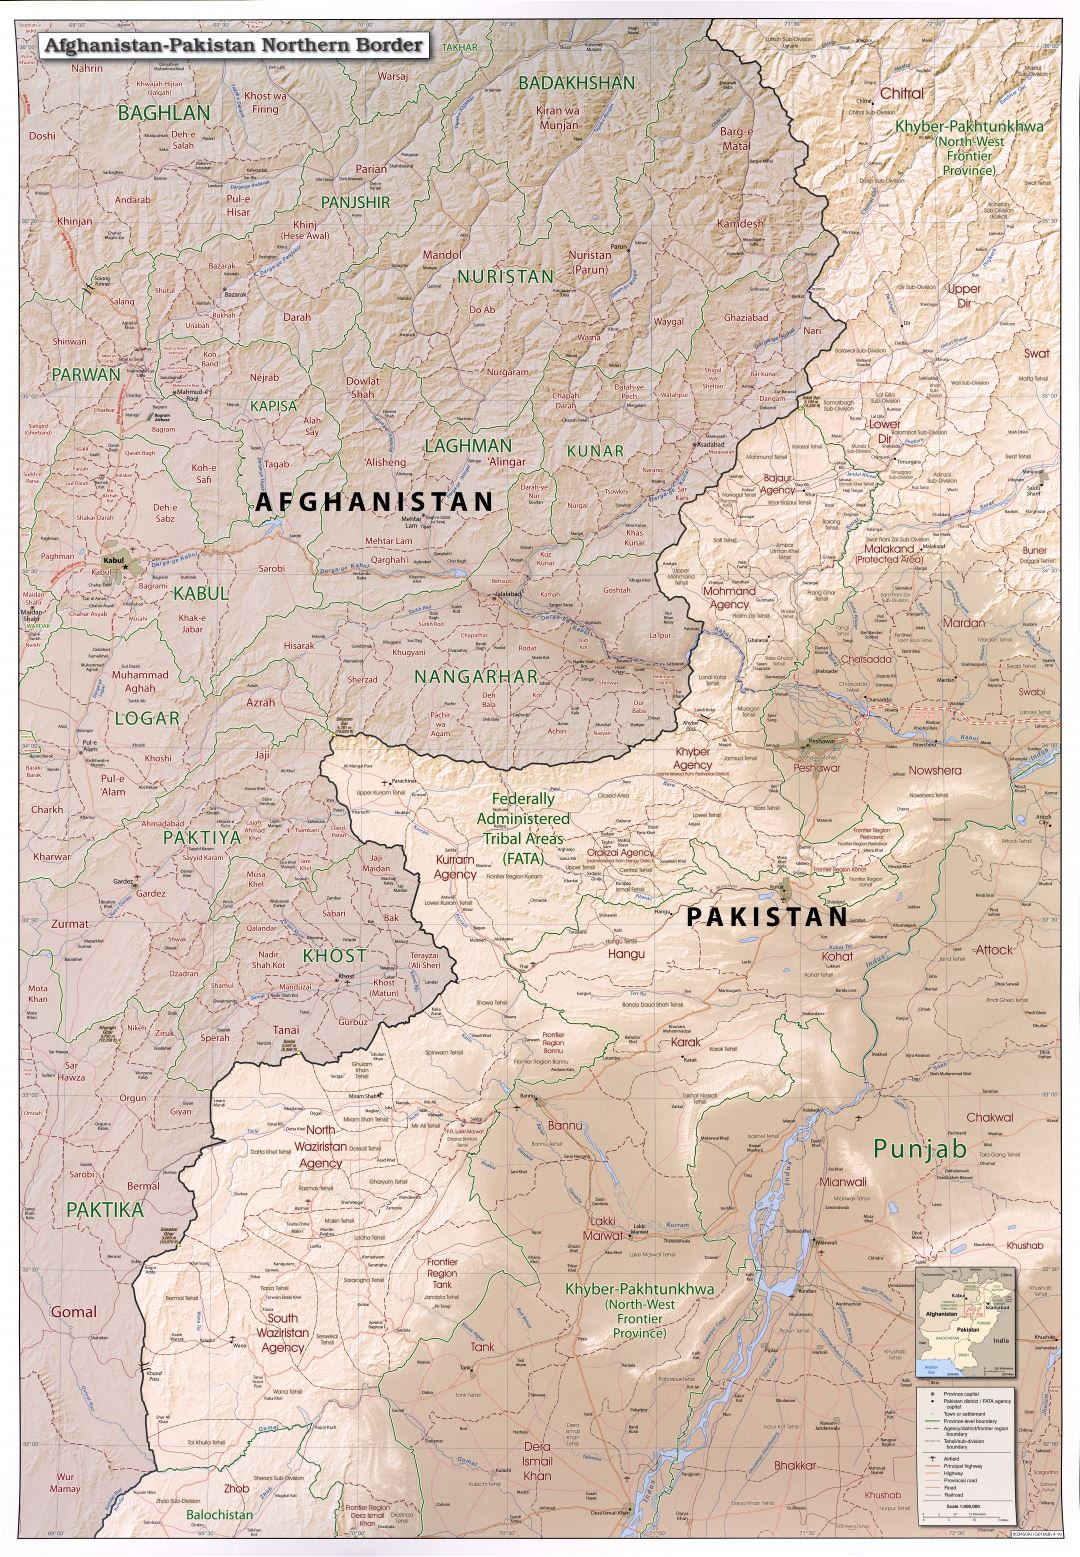 Large scale detailed Afghanistan - Pakistan northern border map with relief, administrative divisions, roads, railroads, airfields and all cities - 2010